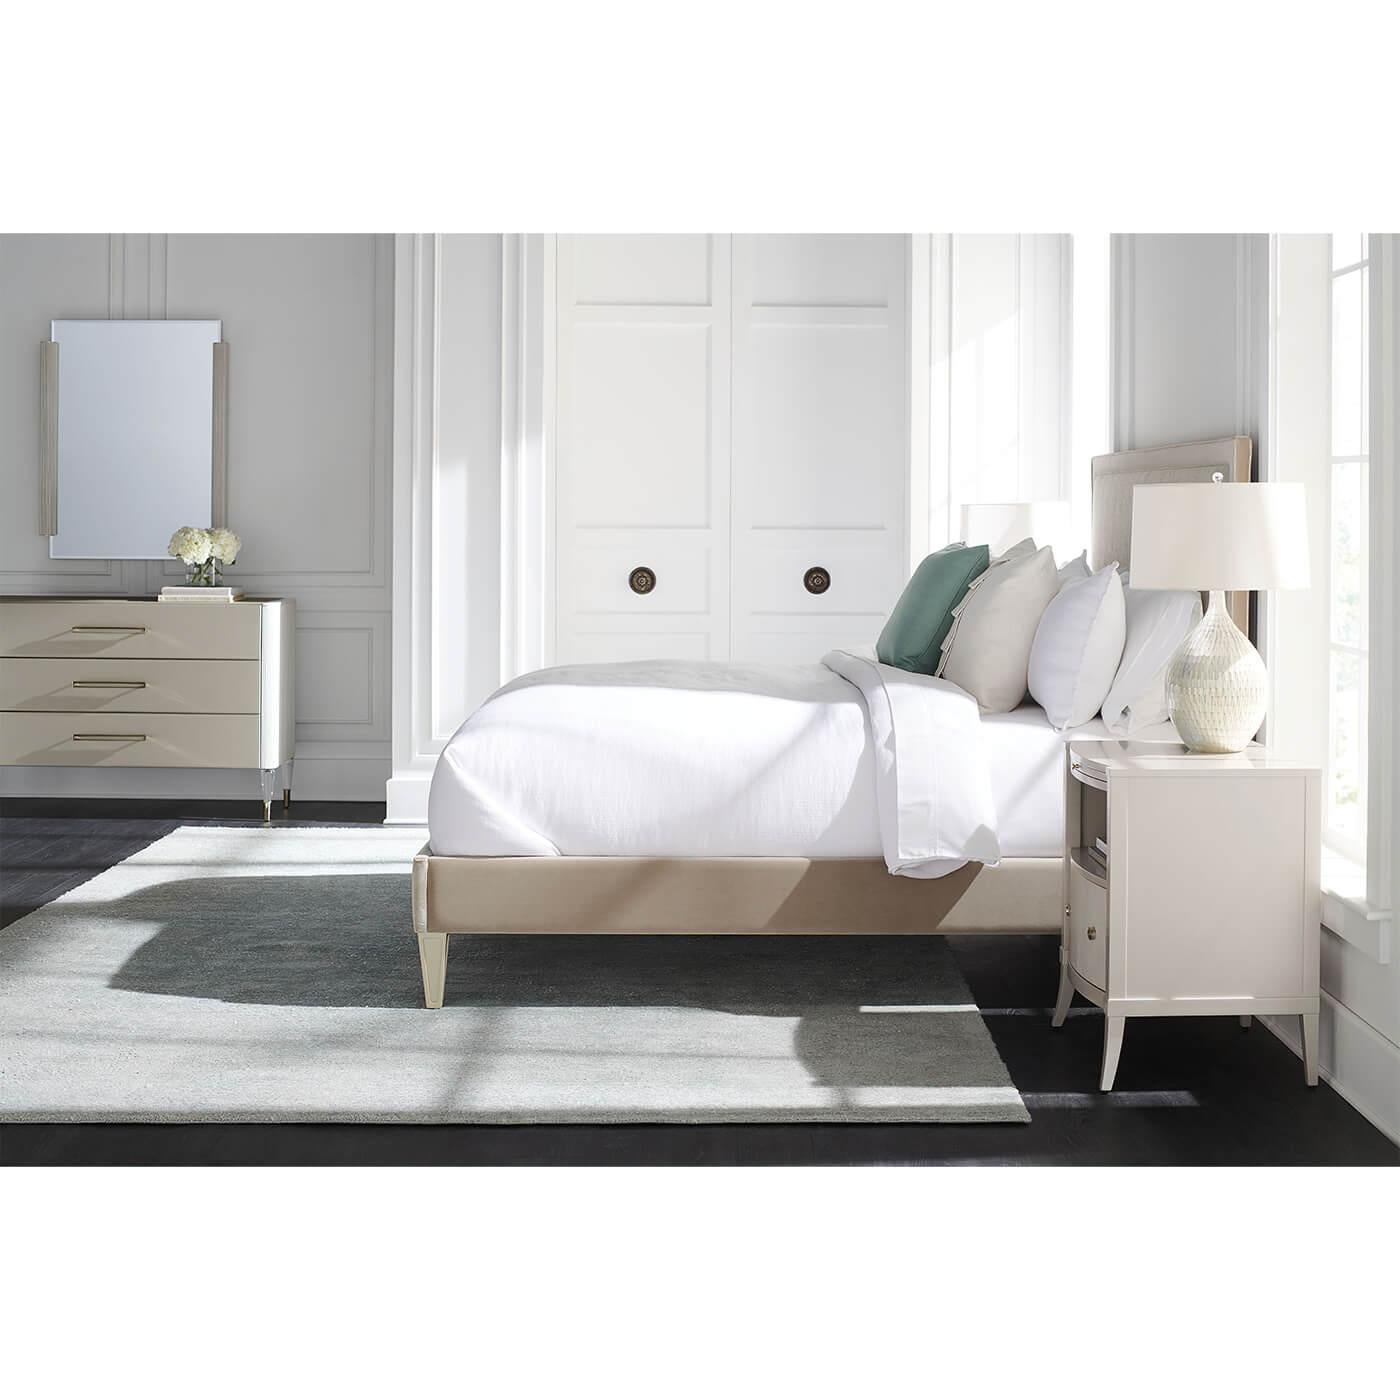 Contemporary Classic Upholstered King Bed For Sale